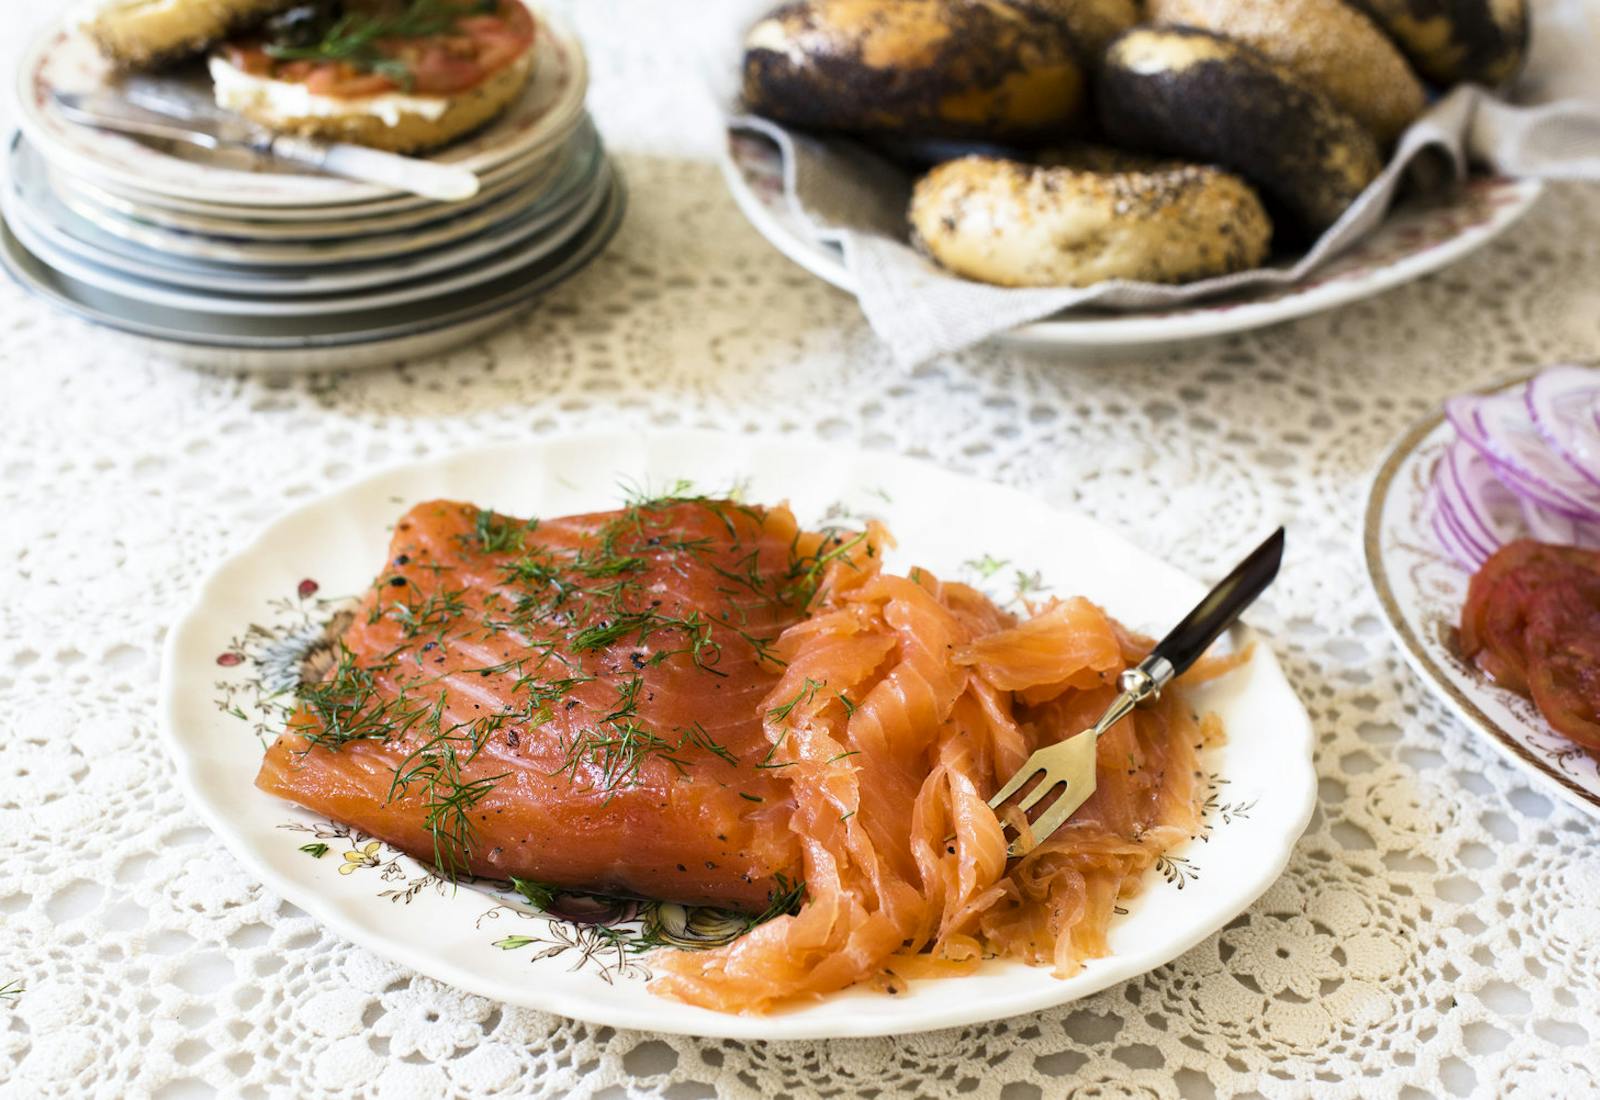 Plate with cured filet of salmon and sliced gravlax garnished with dill alongside plates of poppyseed bagels, tomatoes and sliced red onions atop woven white tablecloth.